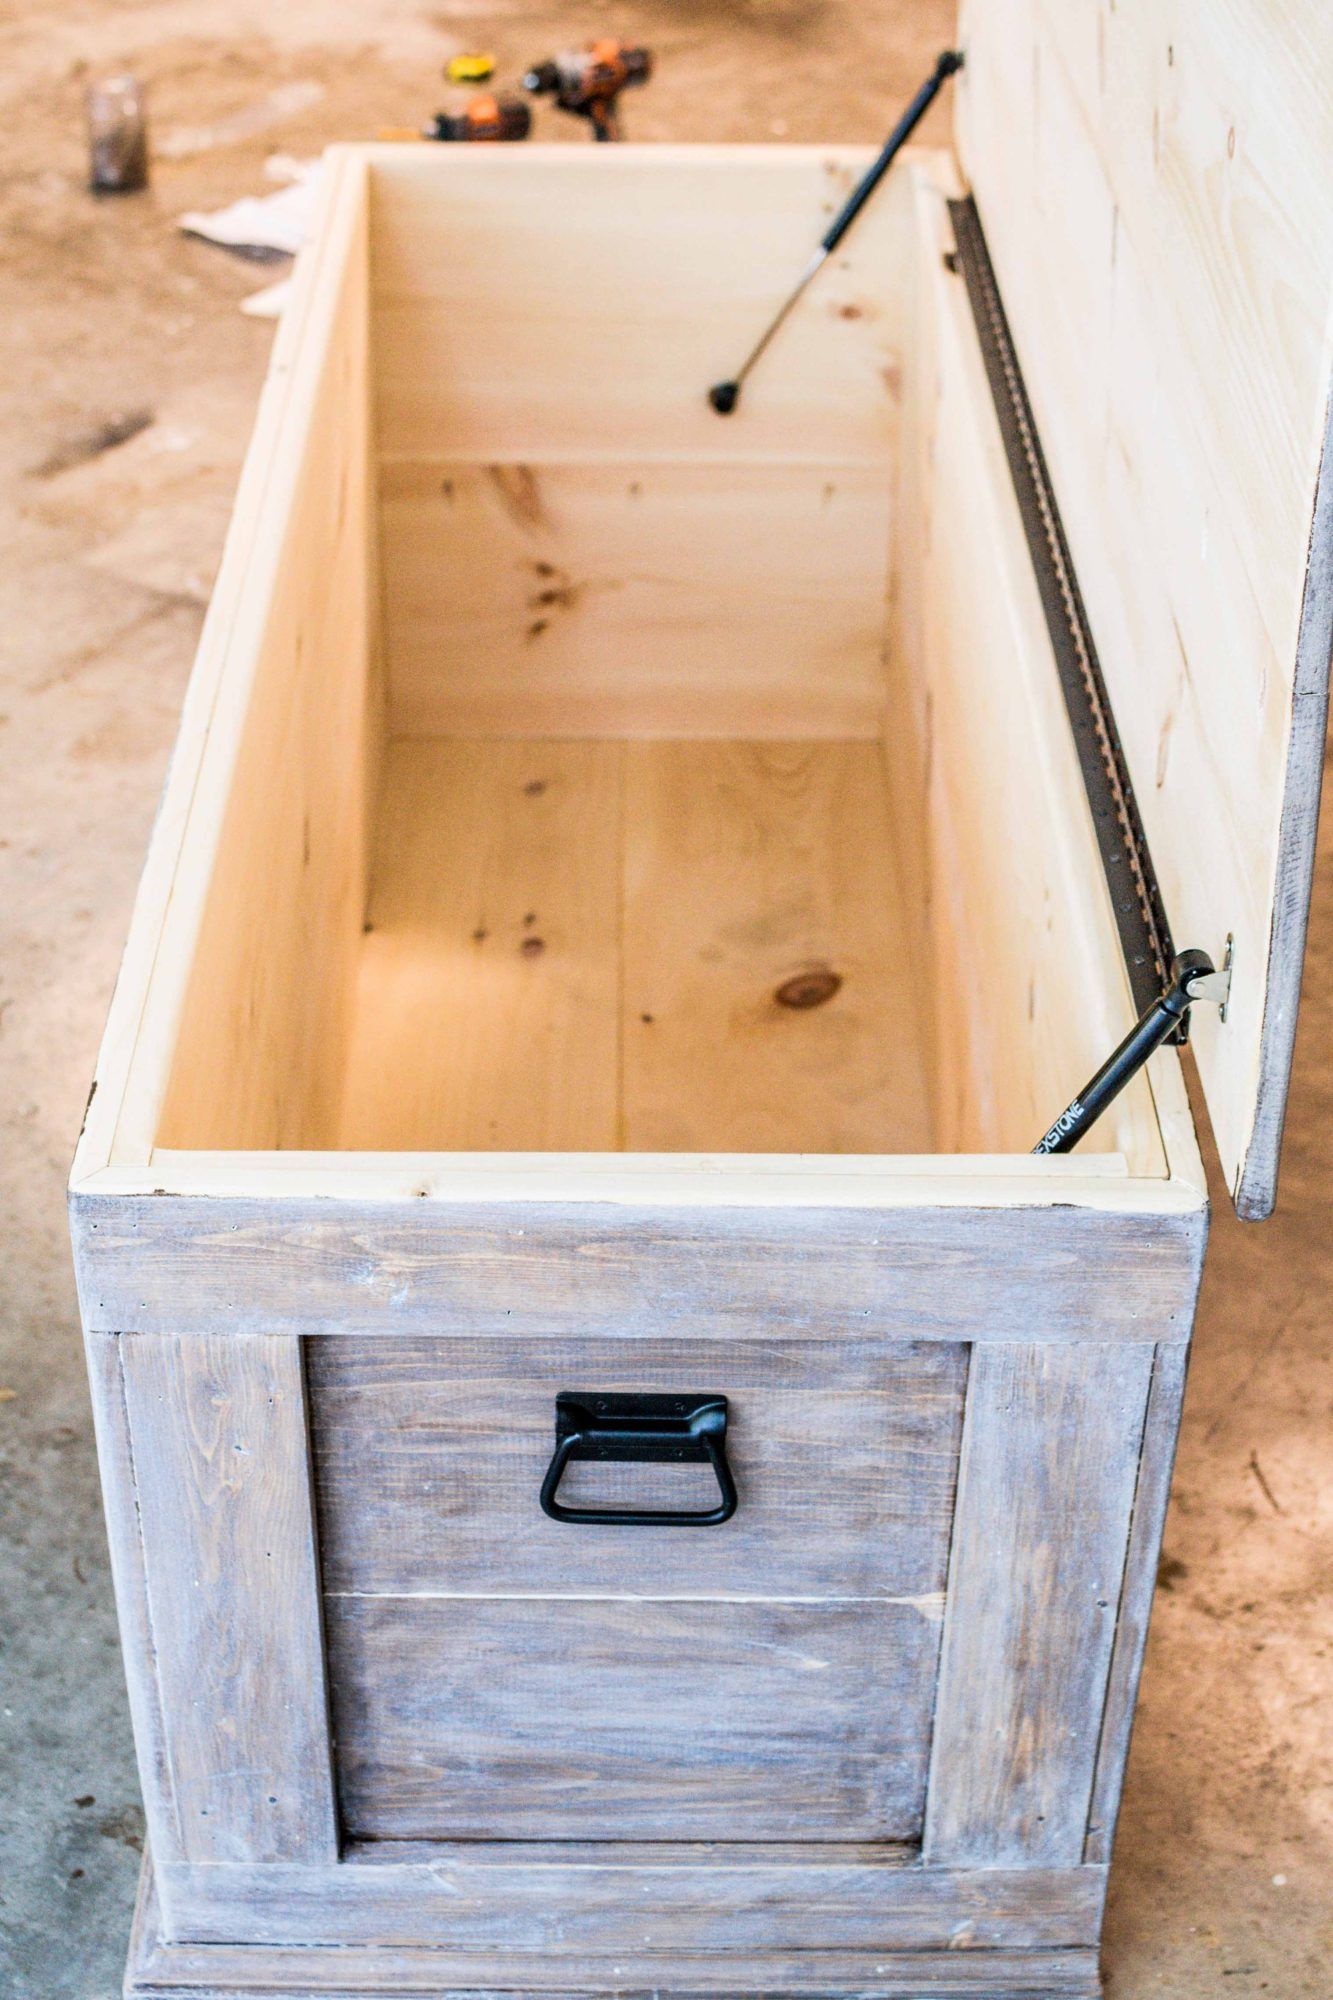 How to Build an Easy DIY Bedroom Storage Chest for Blankets - Building Our Rez - How to Build an Easy DIY Bedroom Storage Chest for Blankets - Building Our Rez -   18 diy Muebles cajas ideas